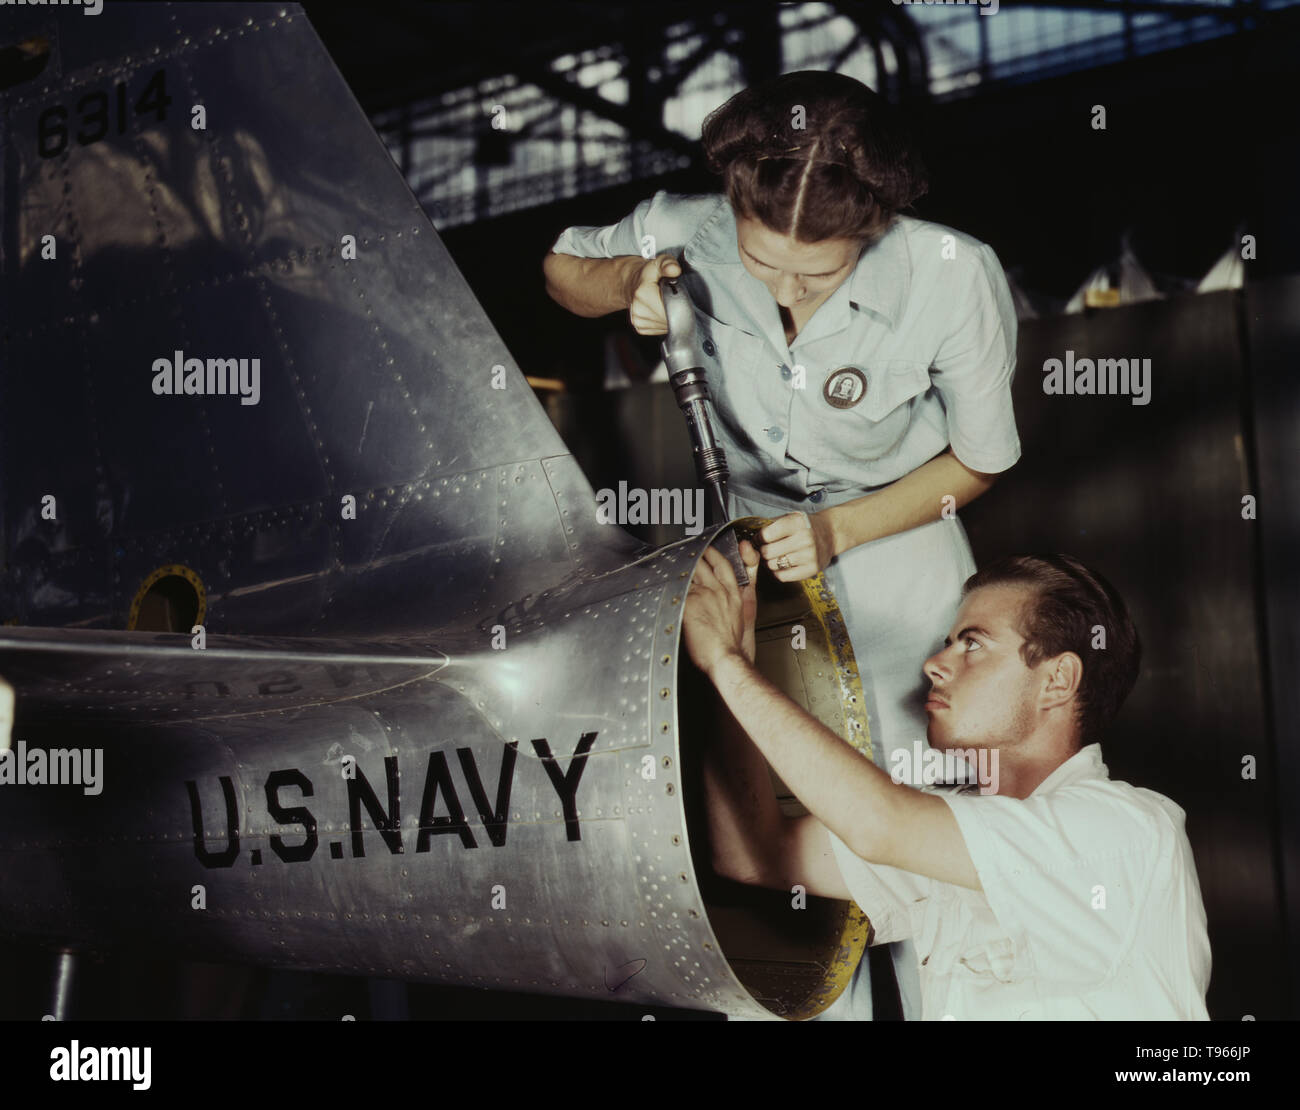 Mrs. Virginia Davis, a riveter in the assembly and repair department of the Naval air base, supervises Charles Potter, a NYA trainee from Michigan, Corpus Christi, Texas. After eight weeks of training he will go into civil service. Should he be inducted or enlist in the armed service, he will be valuable to mechanized units of the Army or Navy. Stock Photo